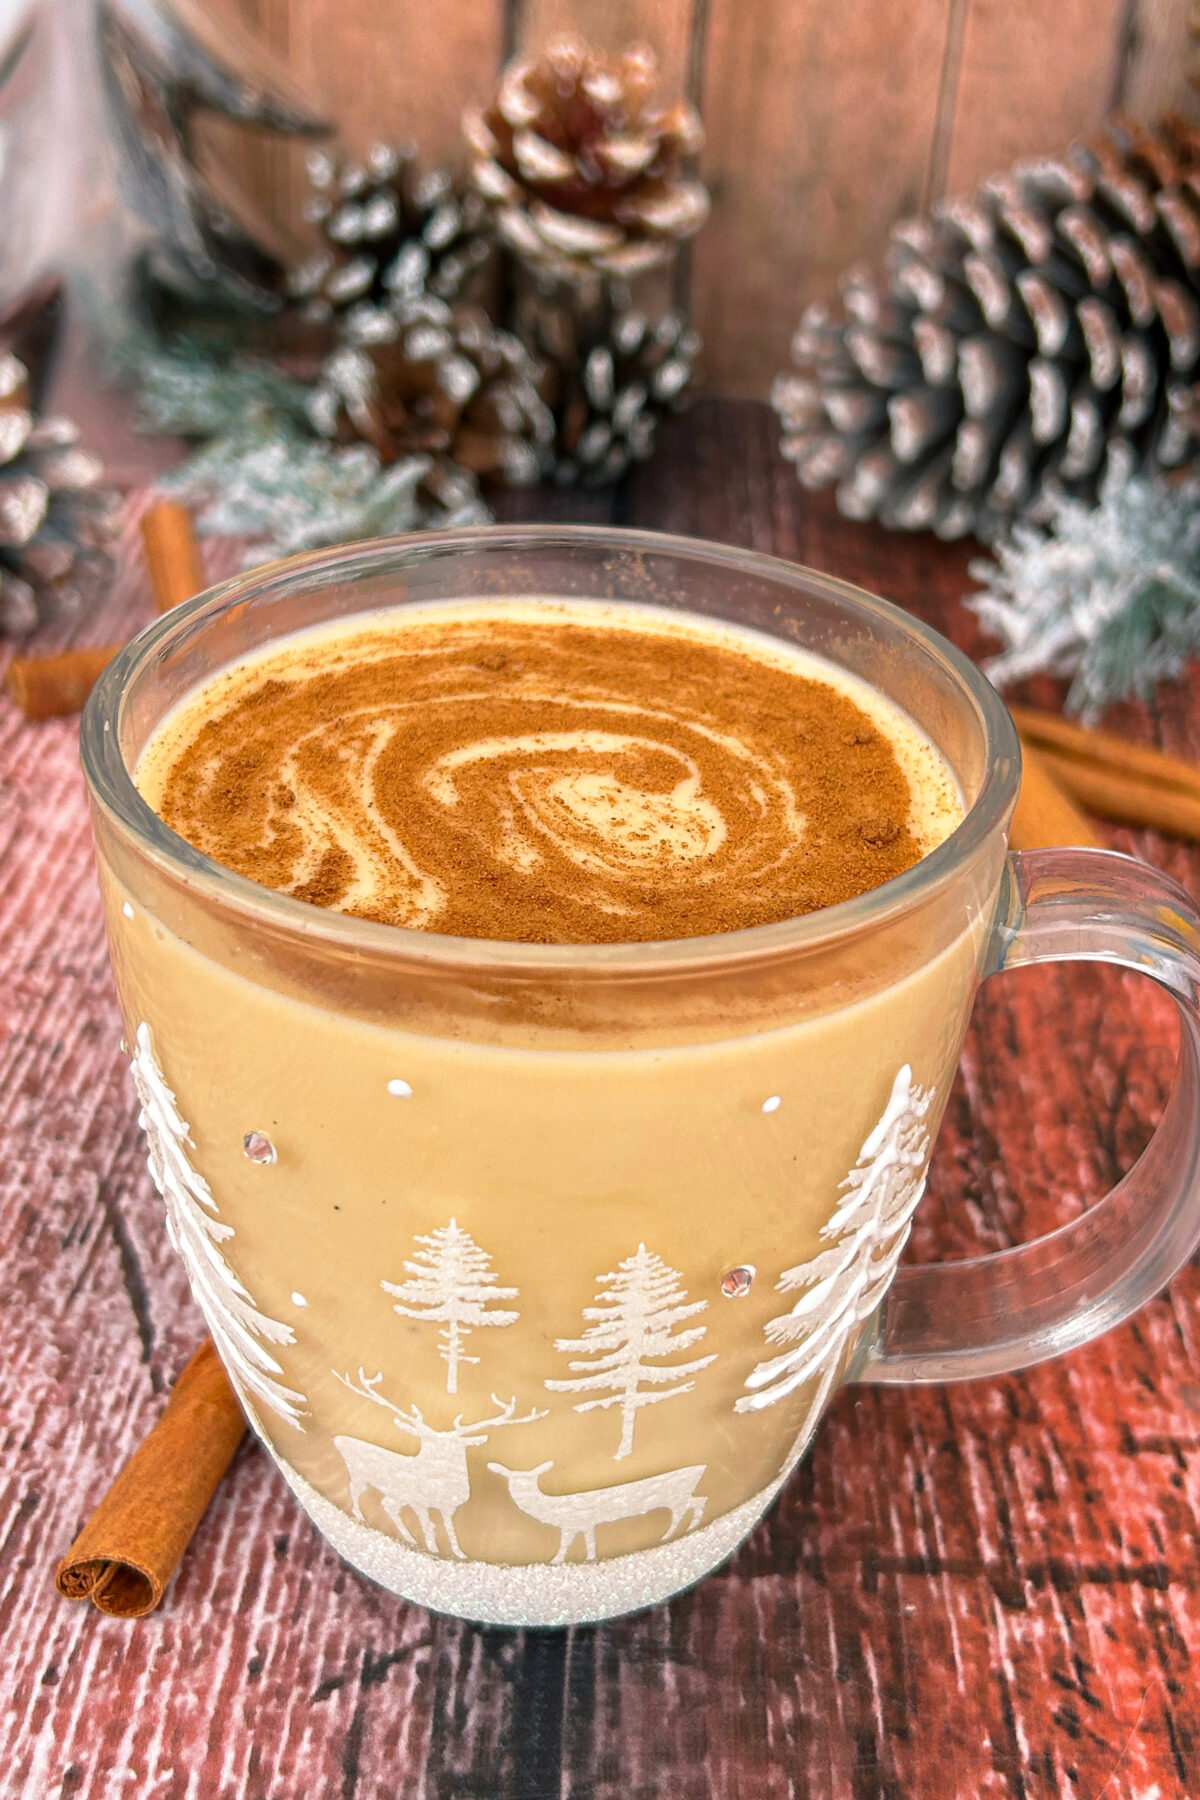 Impress with this festive twist on classic eggnog – perfect for the holiday season! Discover how to make our aromatic dirty chai eggnog today.